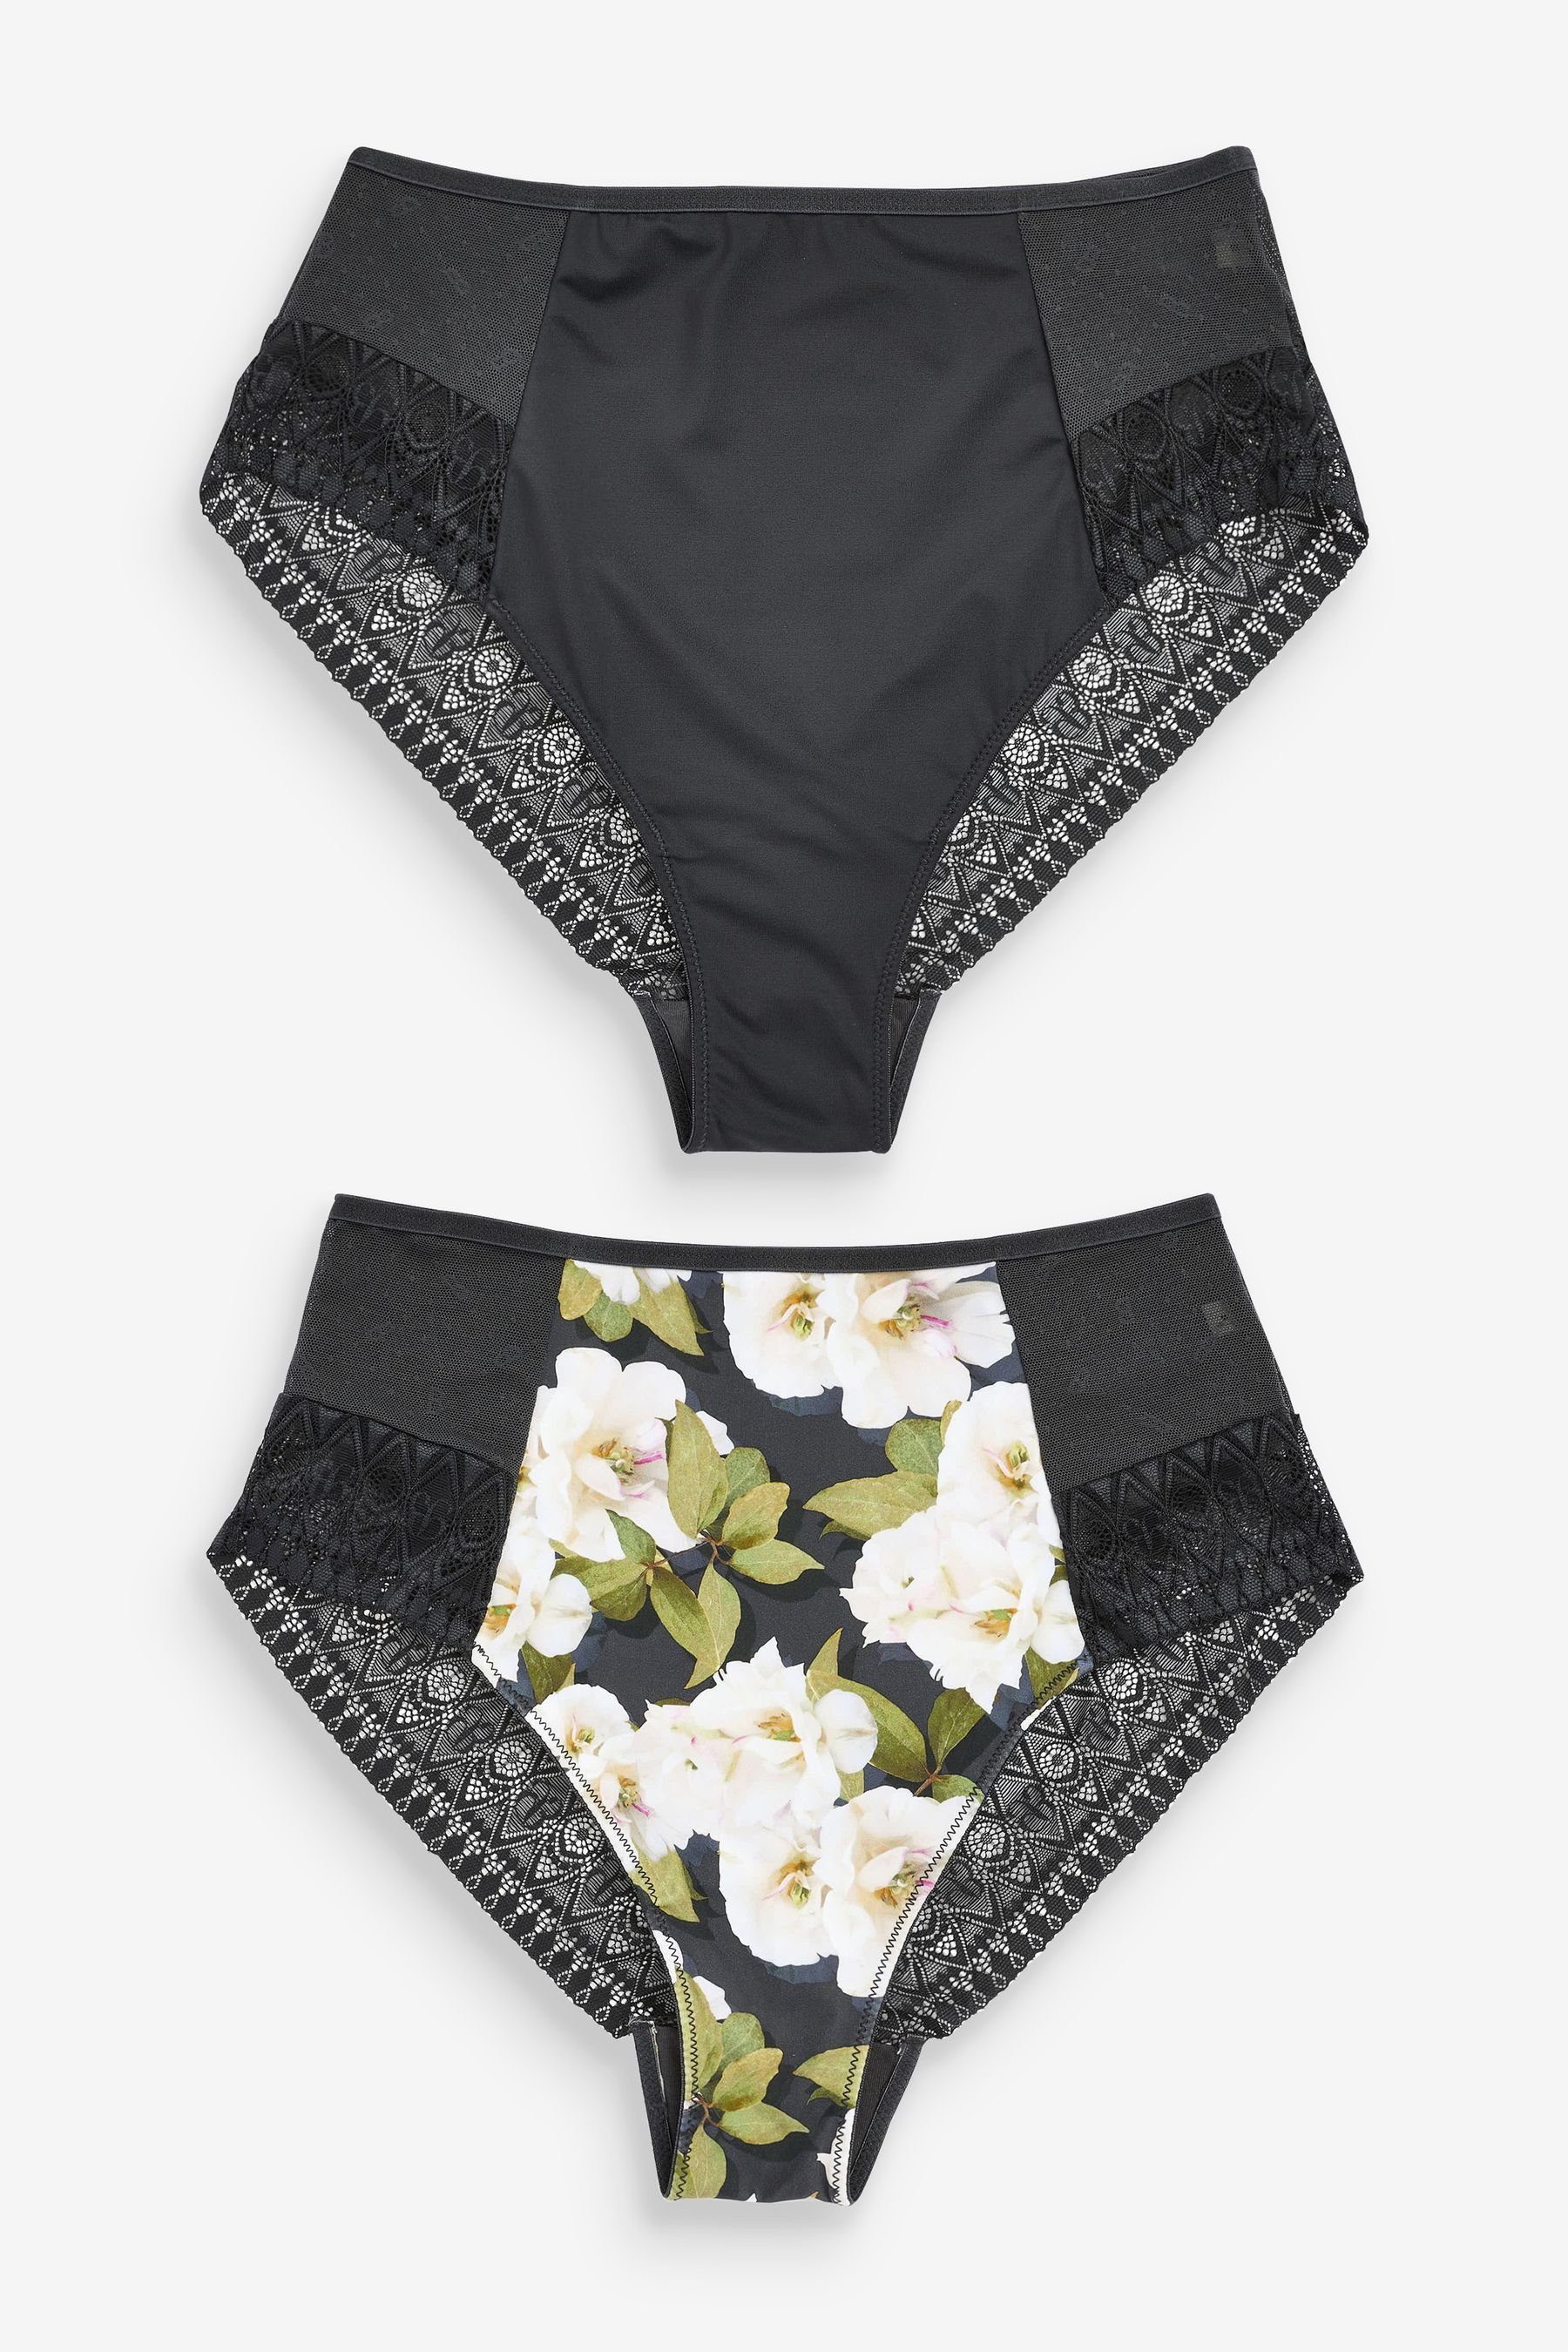 B by Ted Baker Formslip B by Ted Baker Shaping-Slips im 2er-Pack (2-St) Charcoal Grey Floral